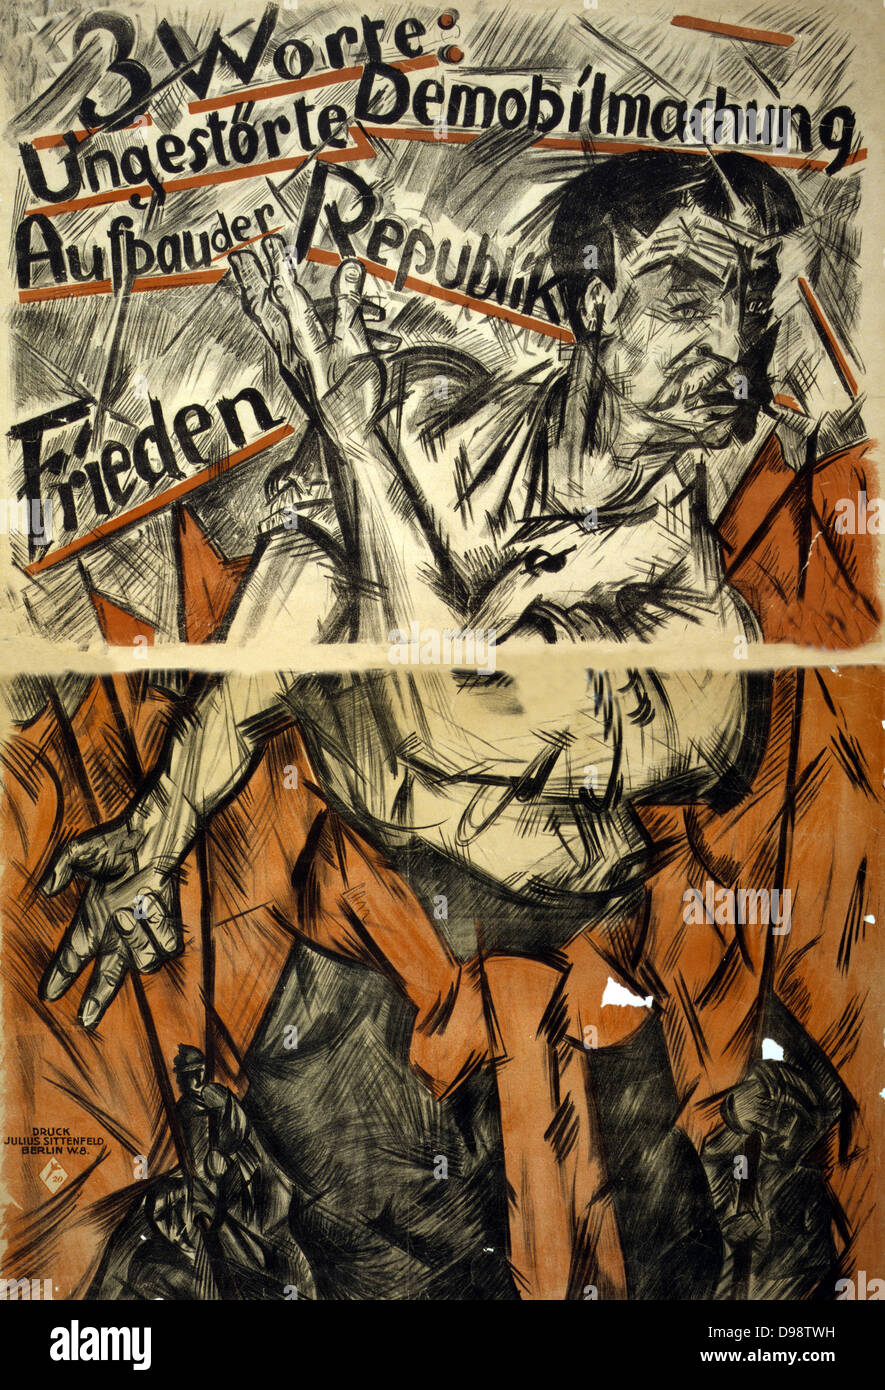 German political poster, 1919. Man with red sash standing against background of red flags points to three phrases underlined in red 'Undisturbed demobilization', 'Creation of the Republic', 'Peace'. Government Election Propaganda Stock Photo